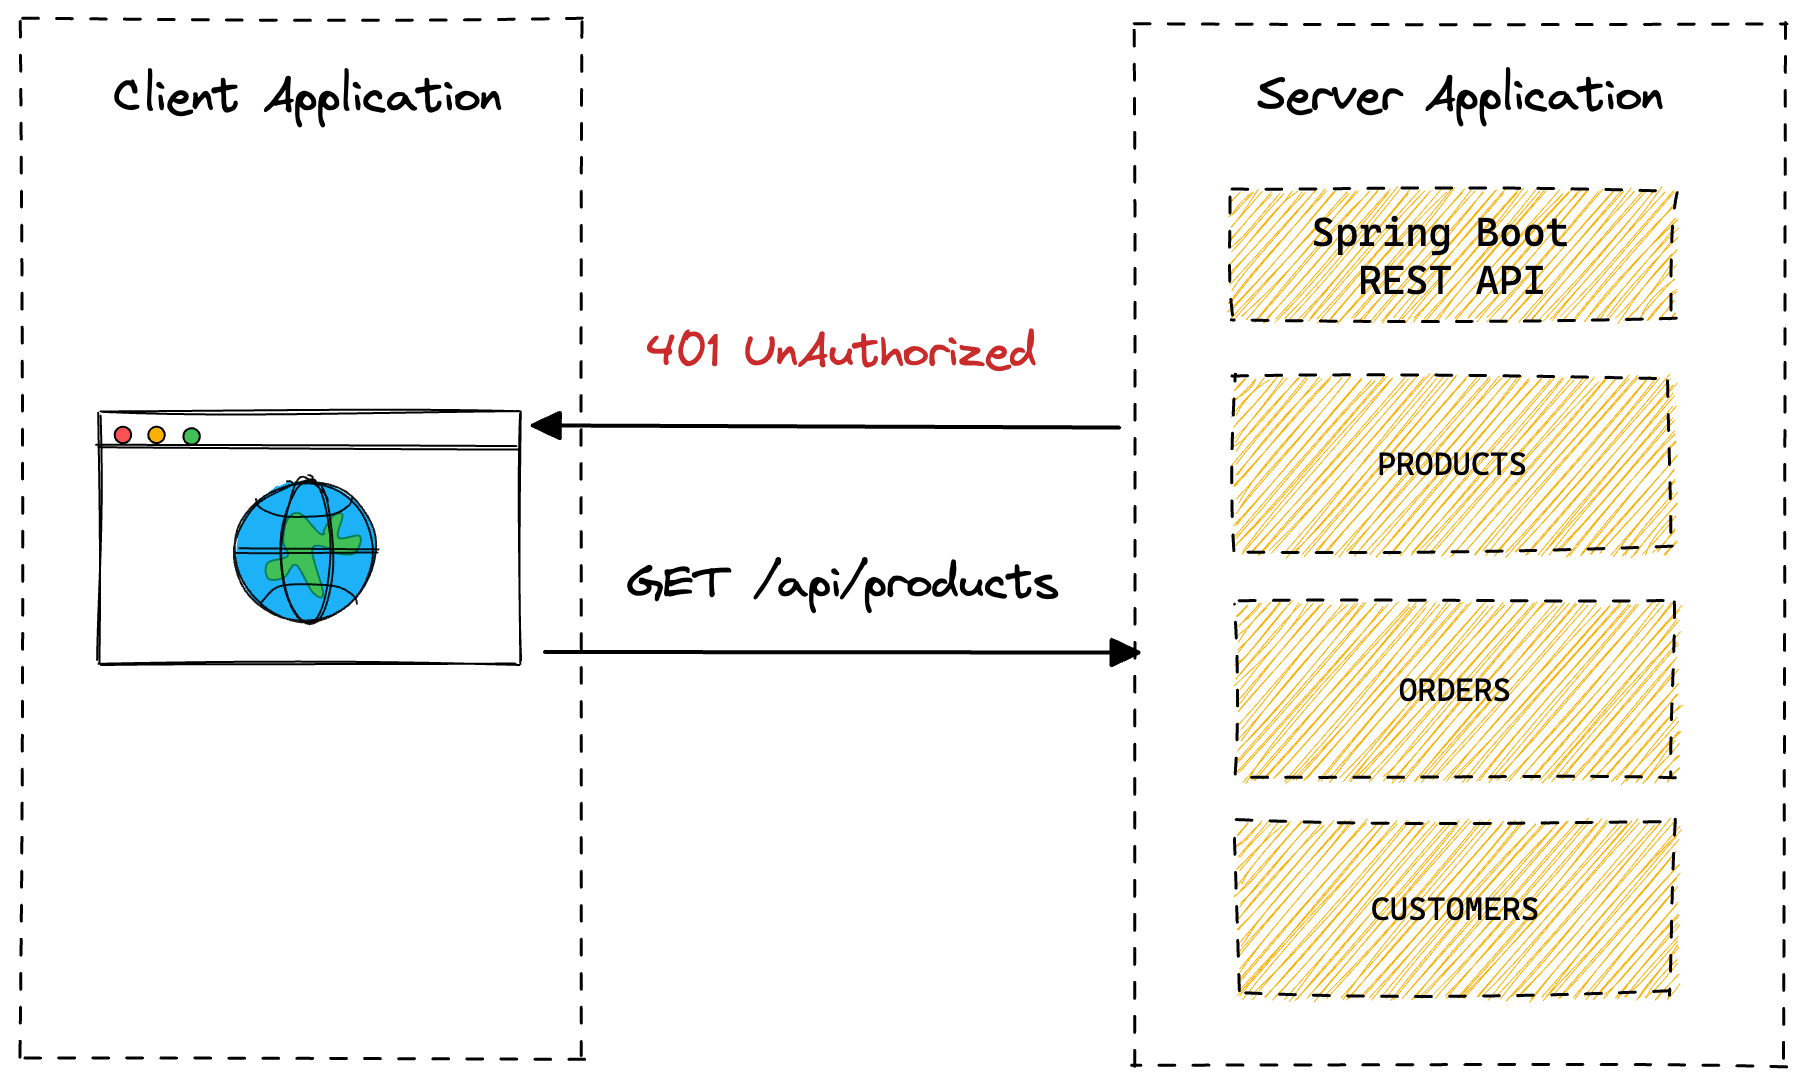 Application Architecture: 401 Unauthorized